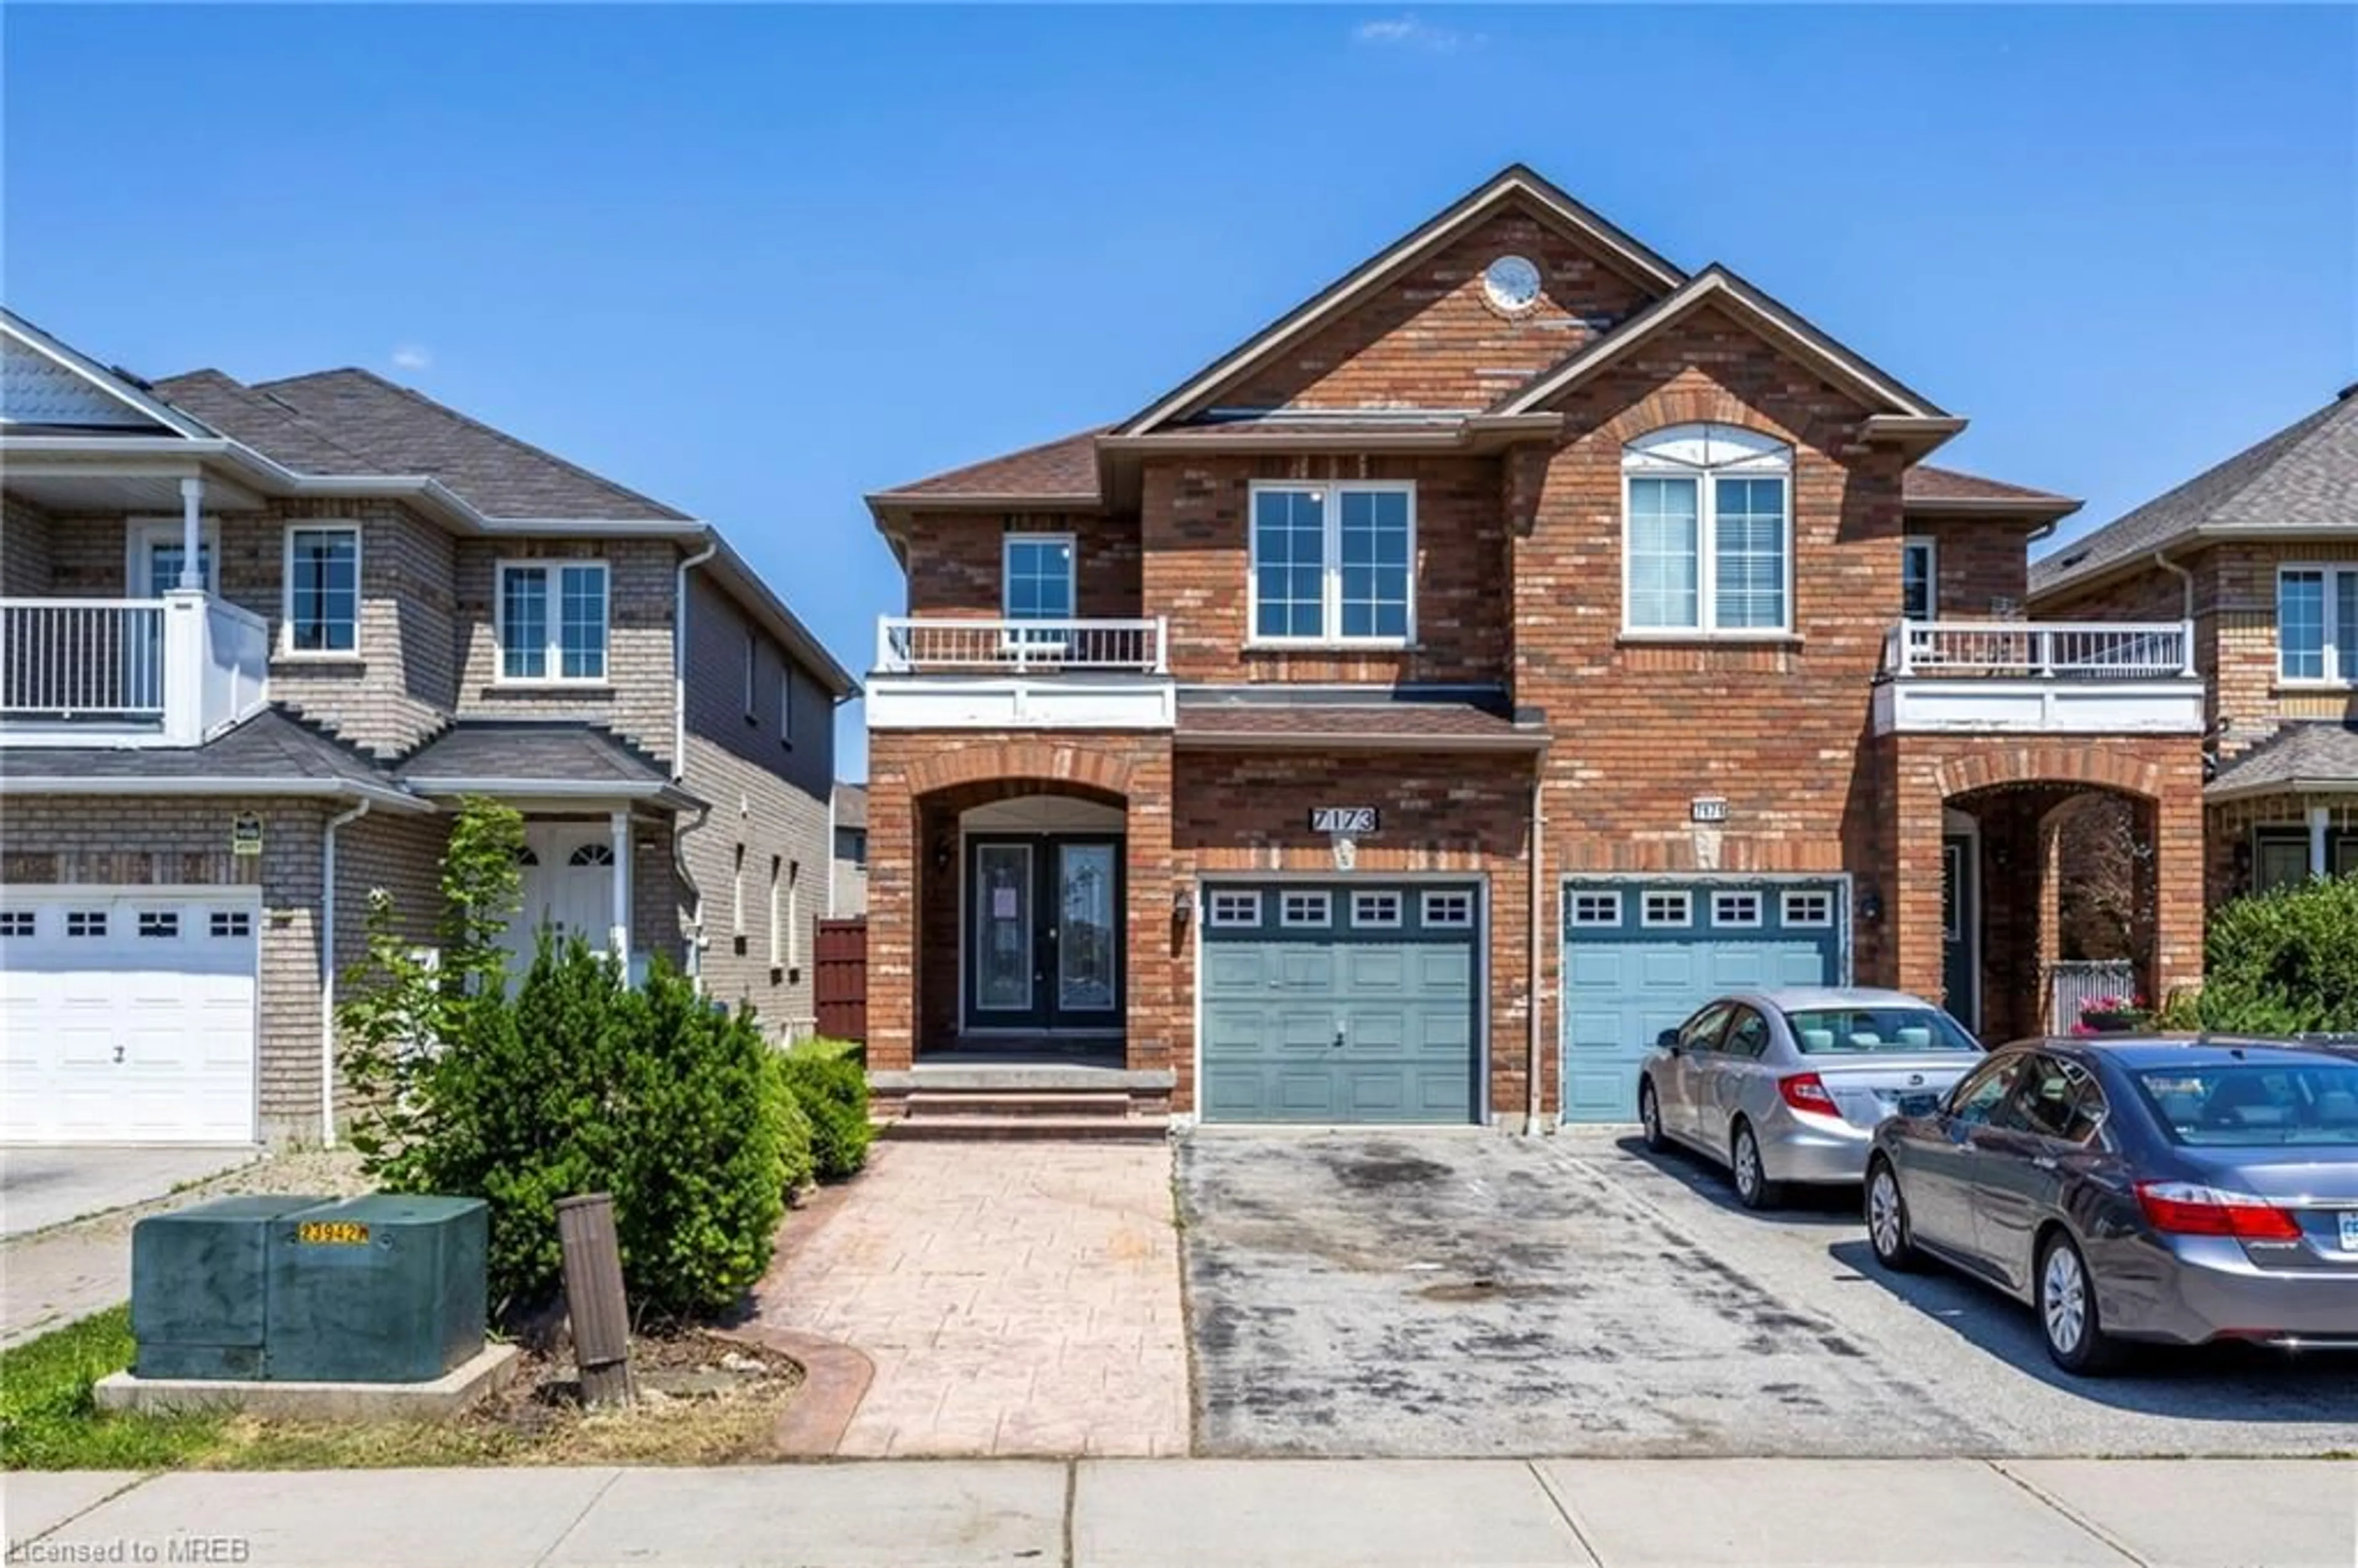 Home with brick exterior material for 7173 Village Walk, Mississauga Ontario L5W 1X2